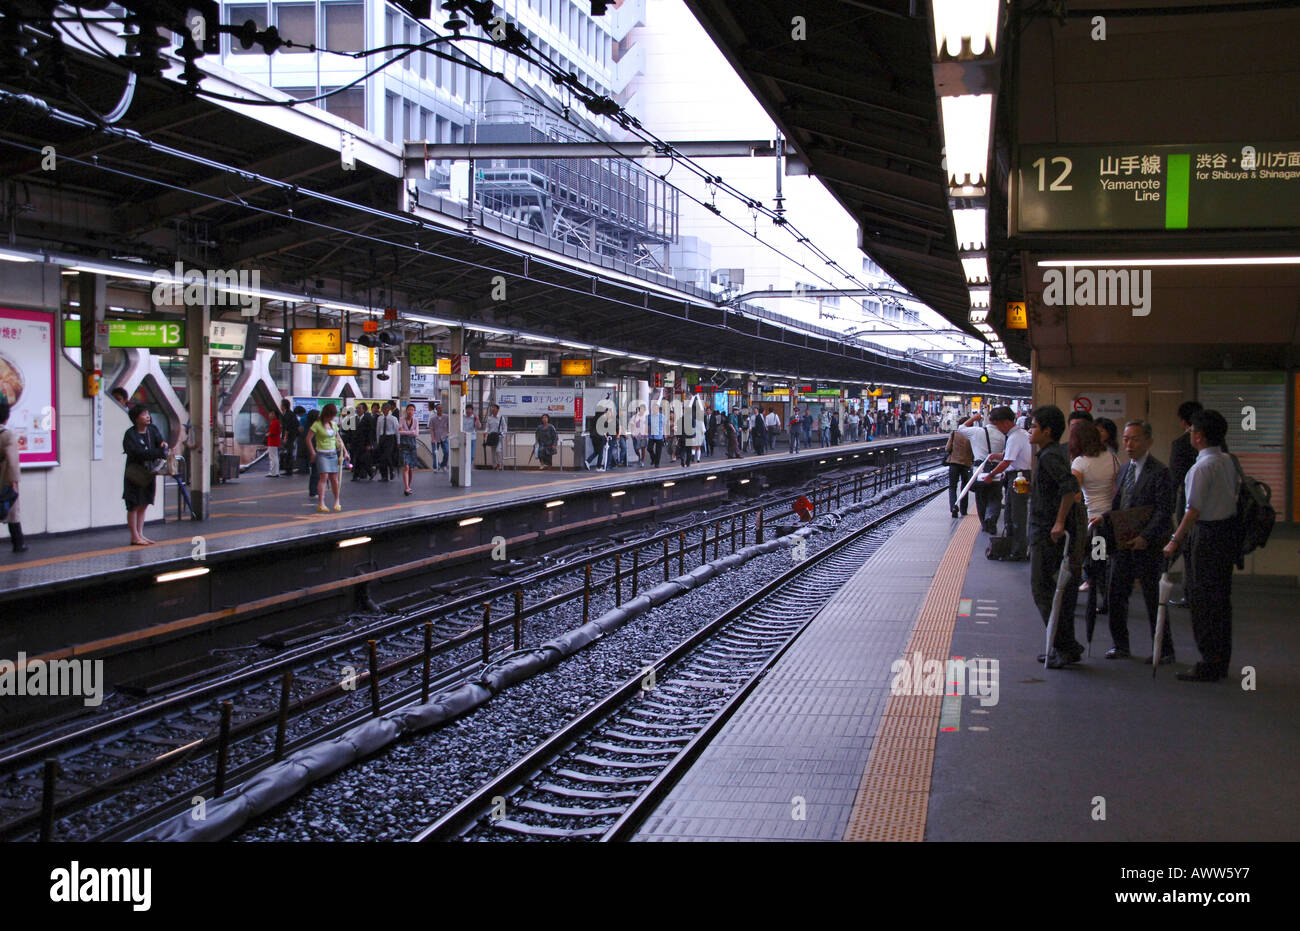 People waiting for trains on the JR Yamanote Line subway system, Tokyo Japan Stock Photo